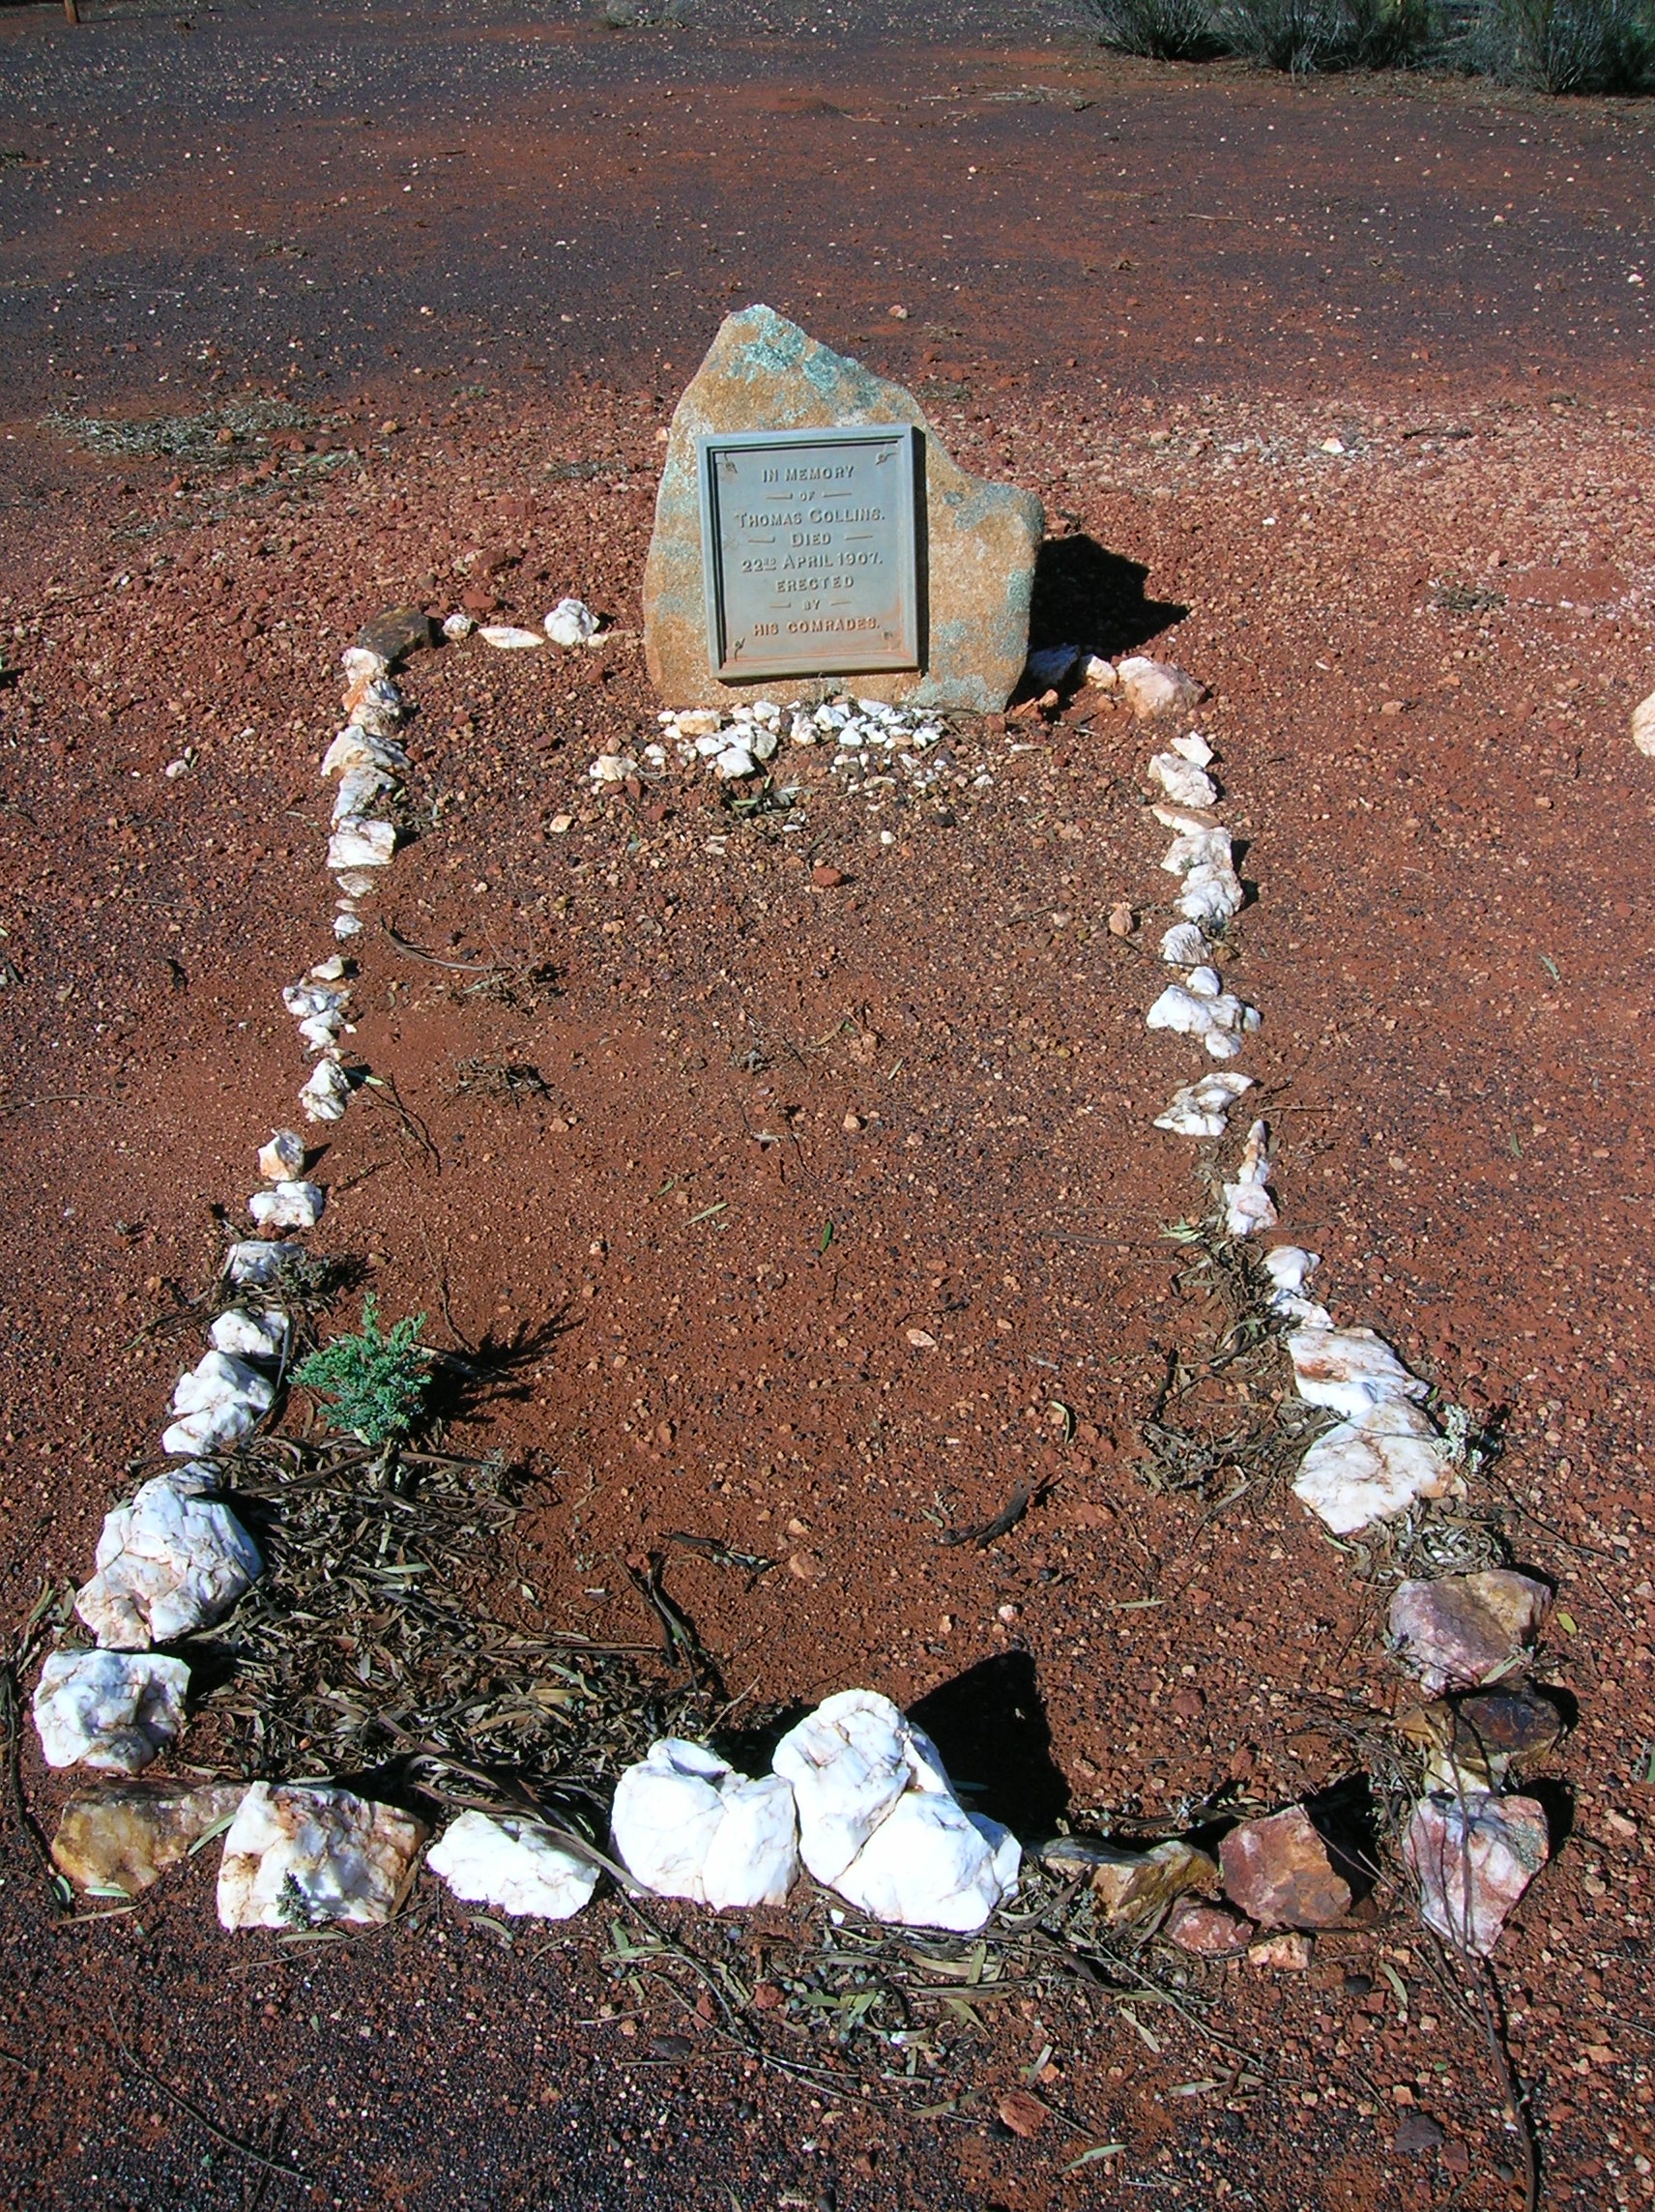 This is a photograph of the grave of Thomas COLLINS